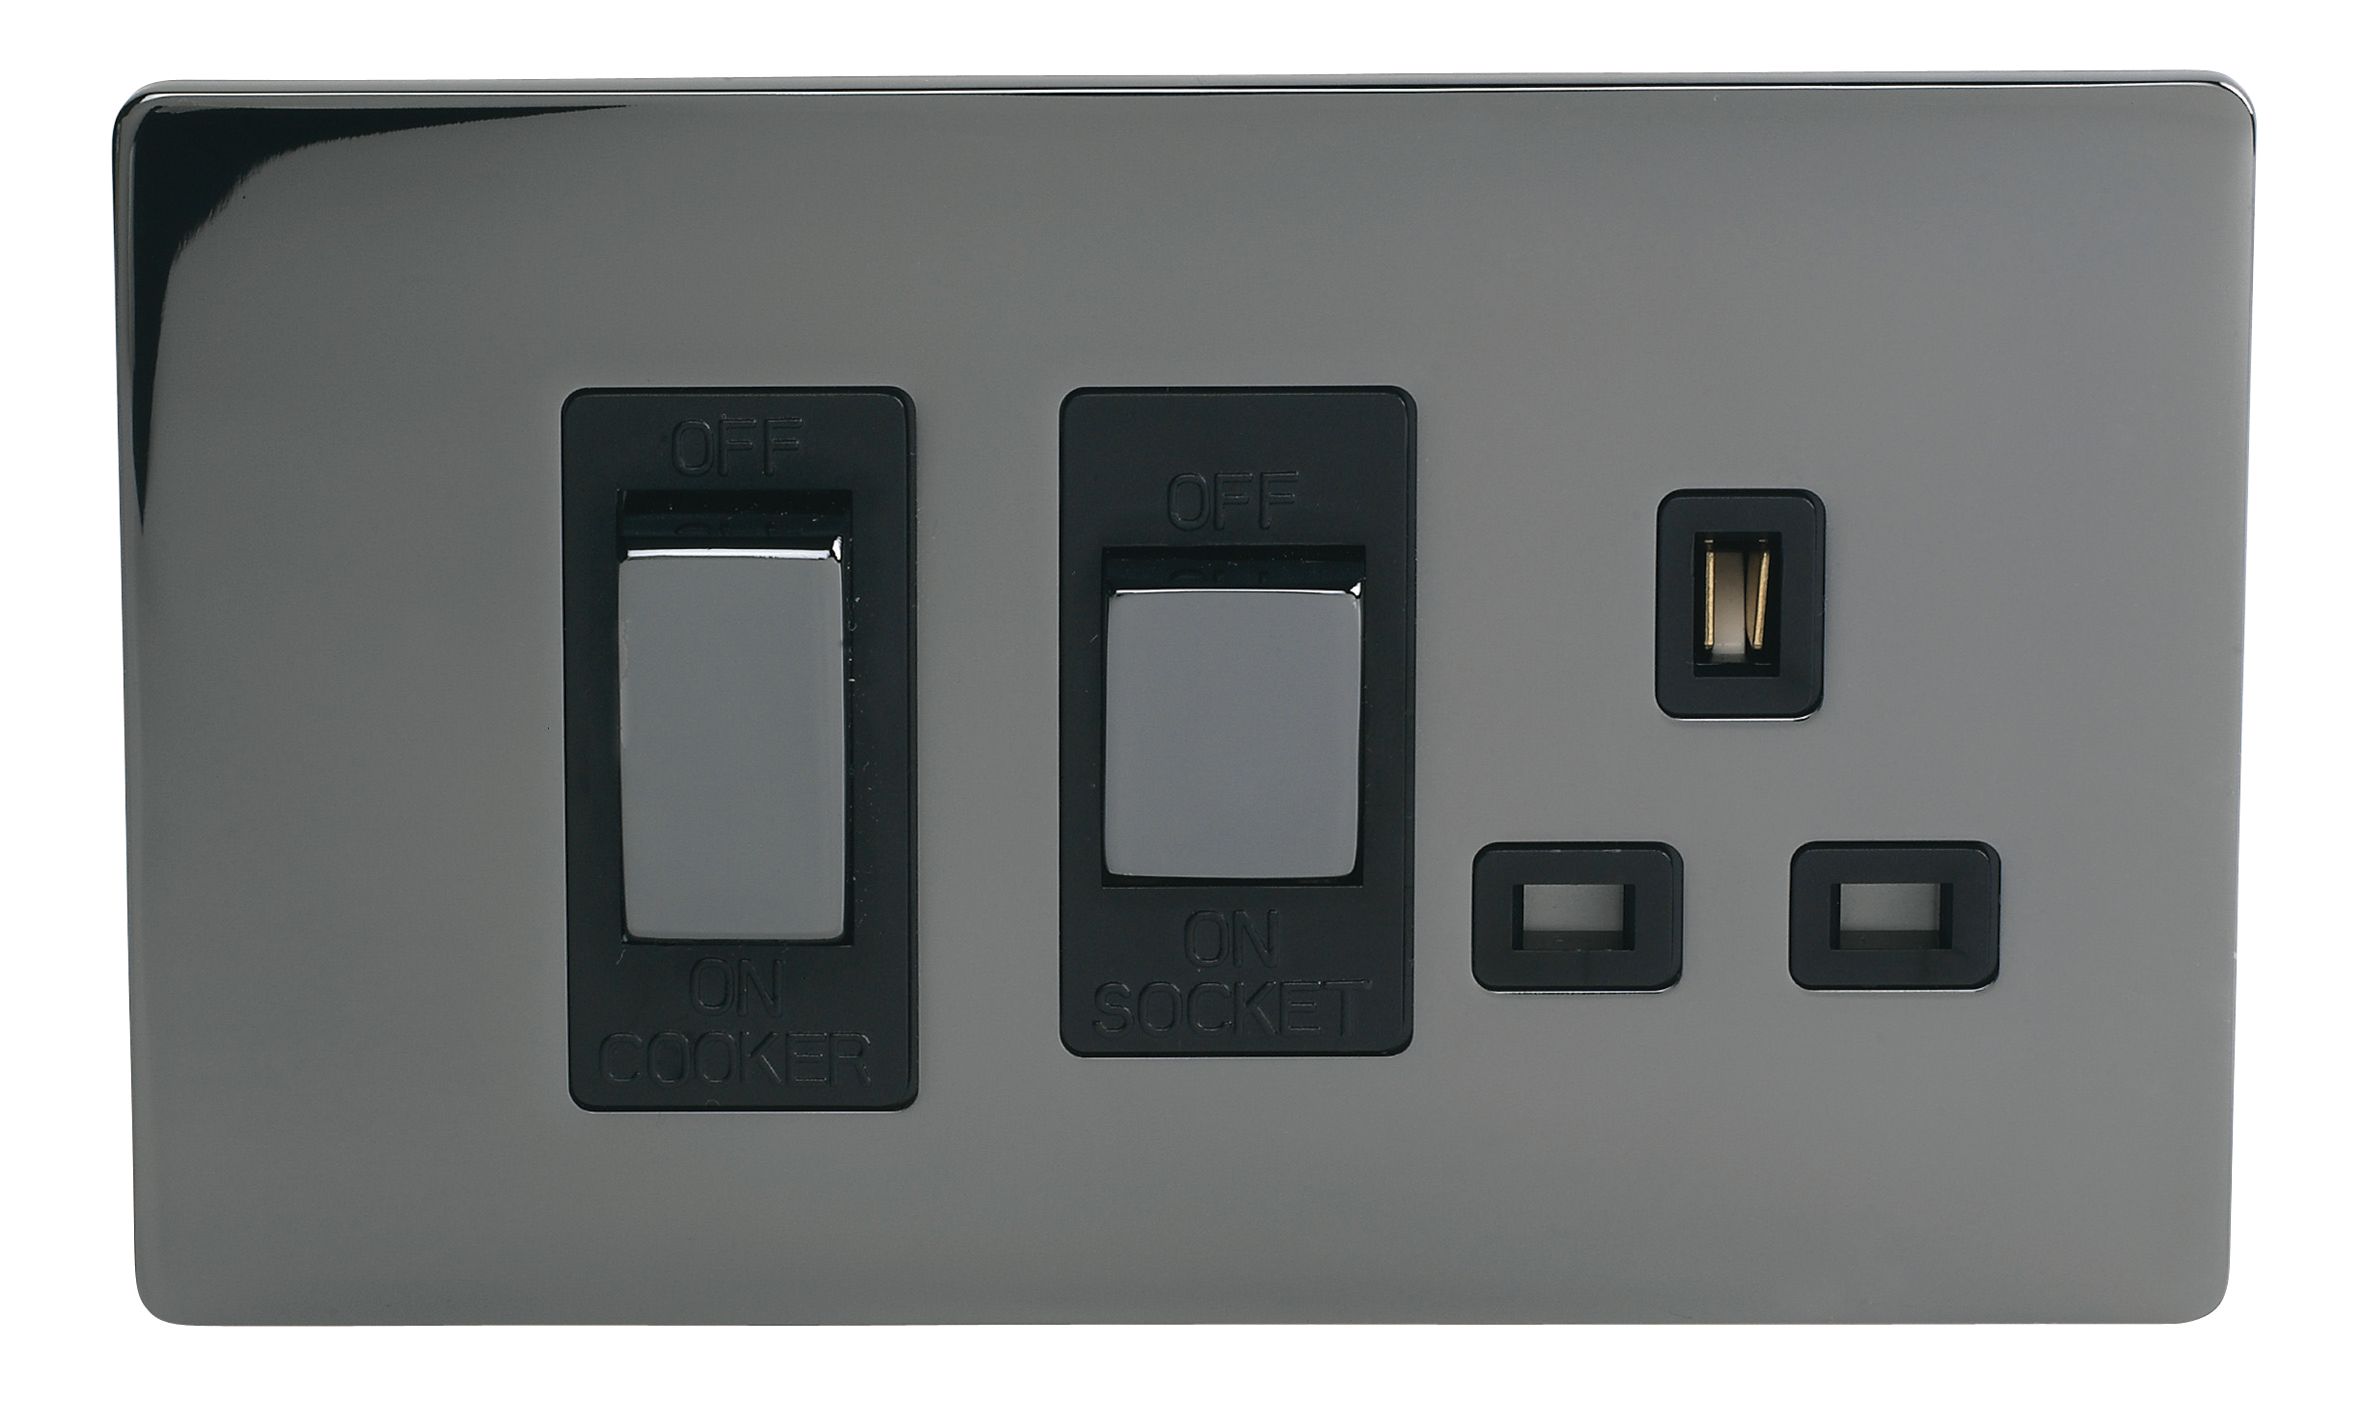 B & q light switches and sockets